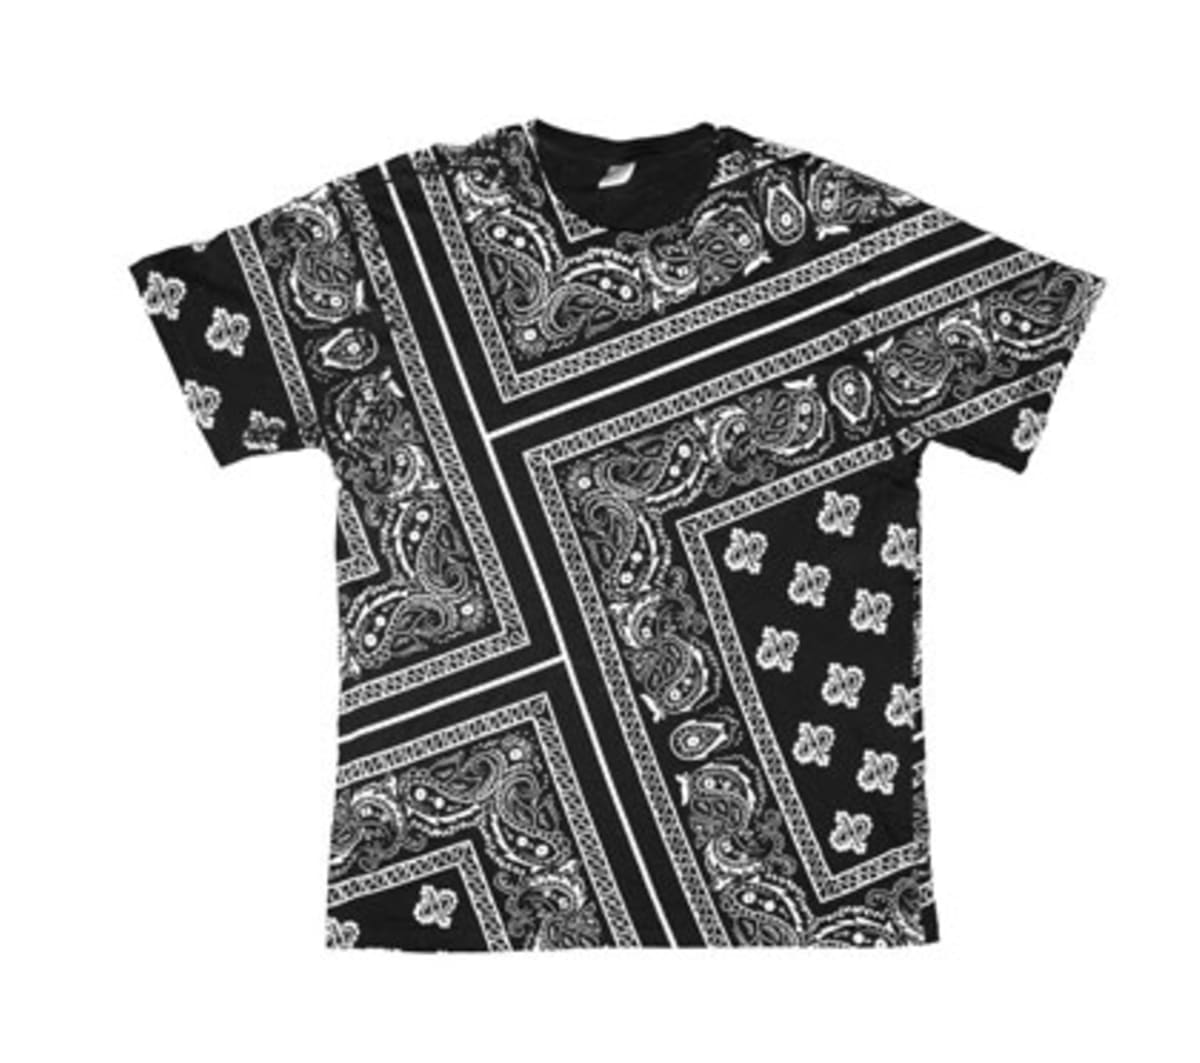 The Bandana Tee From Rhude Is The Only T-Shirt You Need This Summer ...